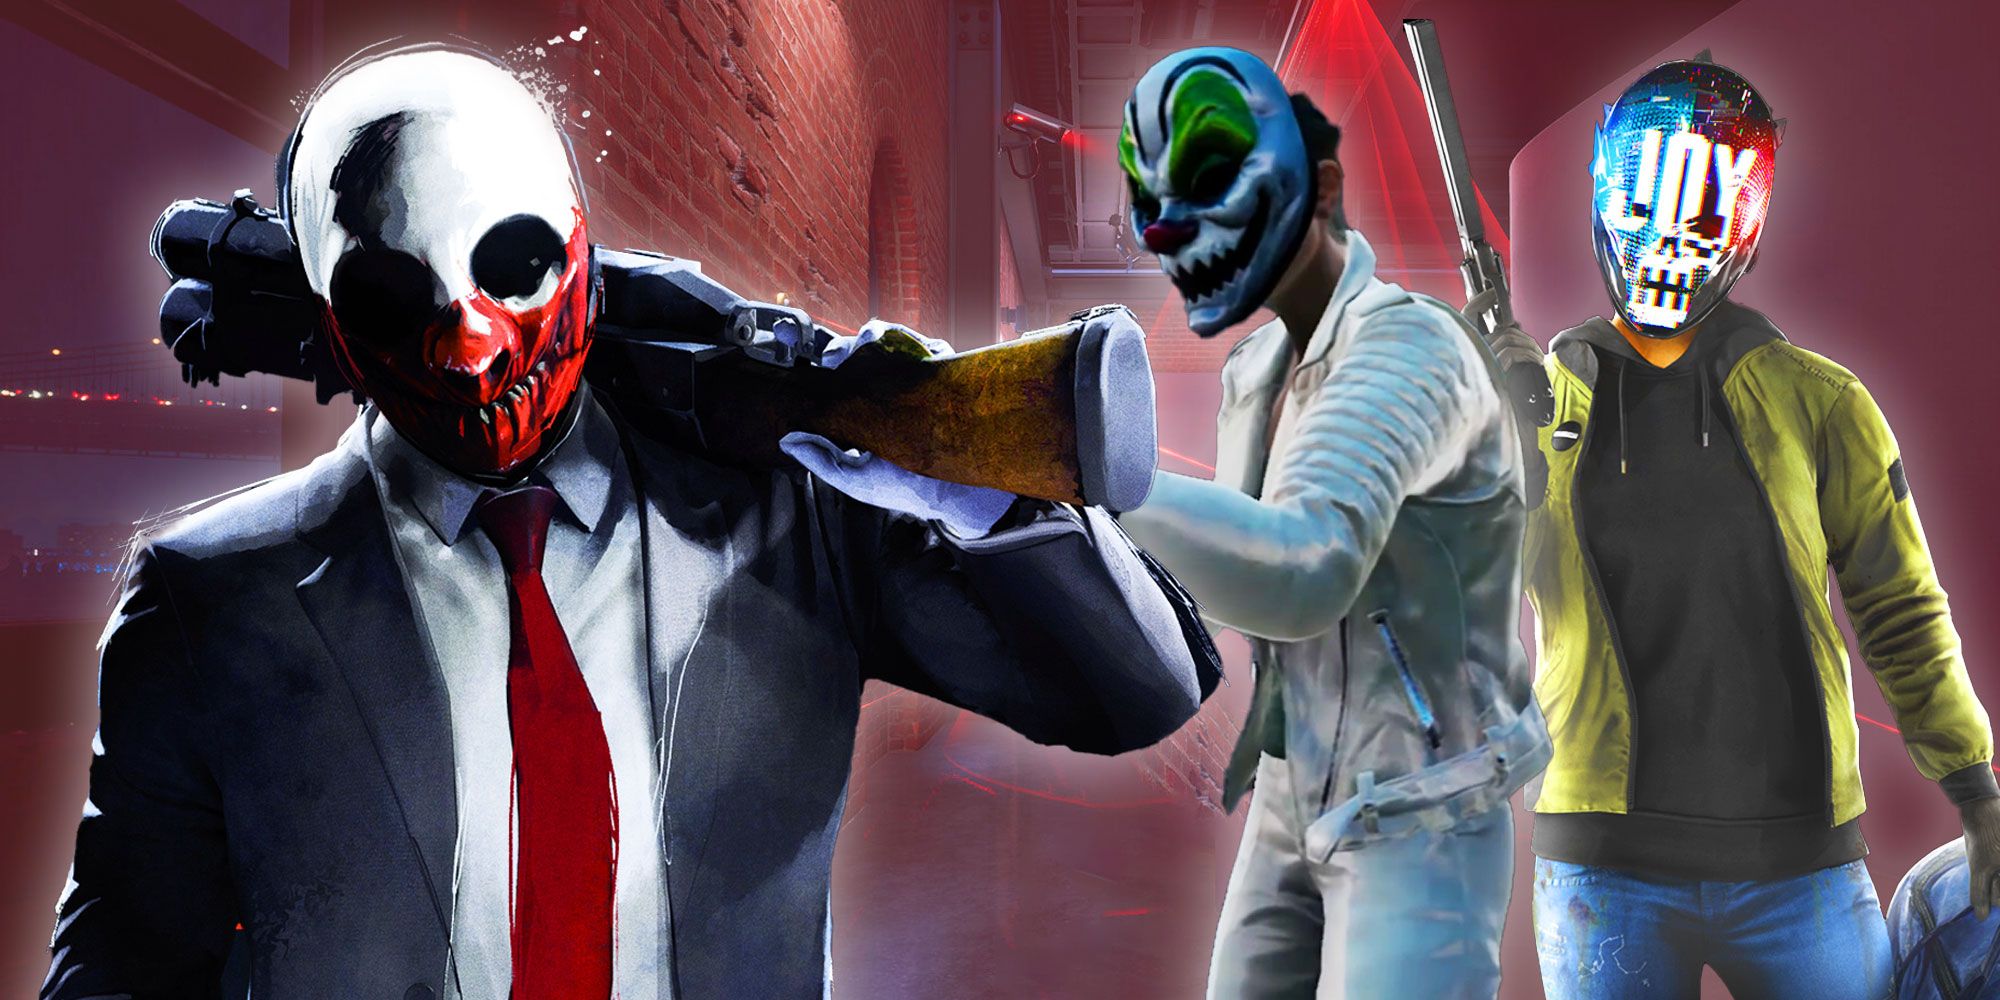 Payday 3 Trailer Showcases Heisters Pearl and Joy, Post-Launch